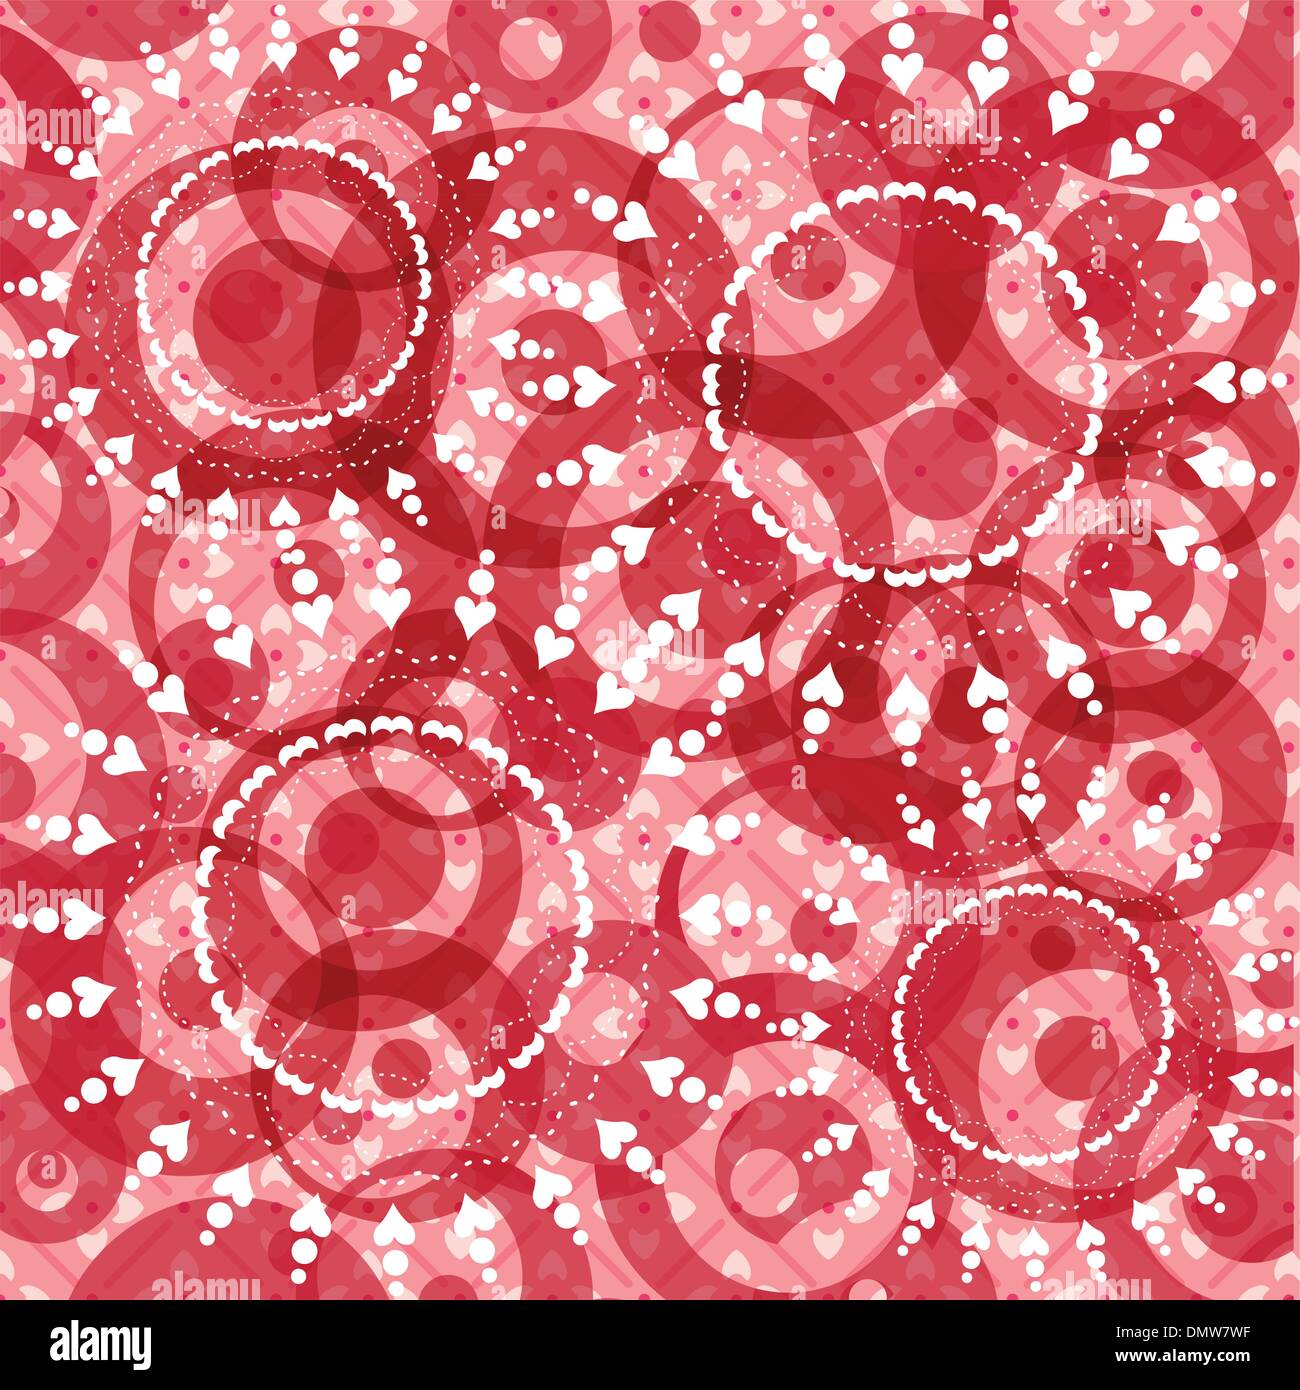 red and white background with circles and hearts Stock Vector